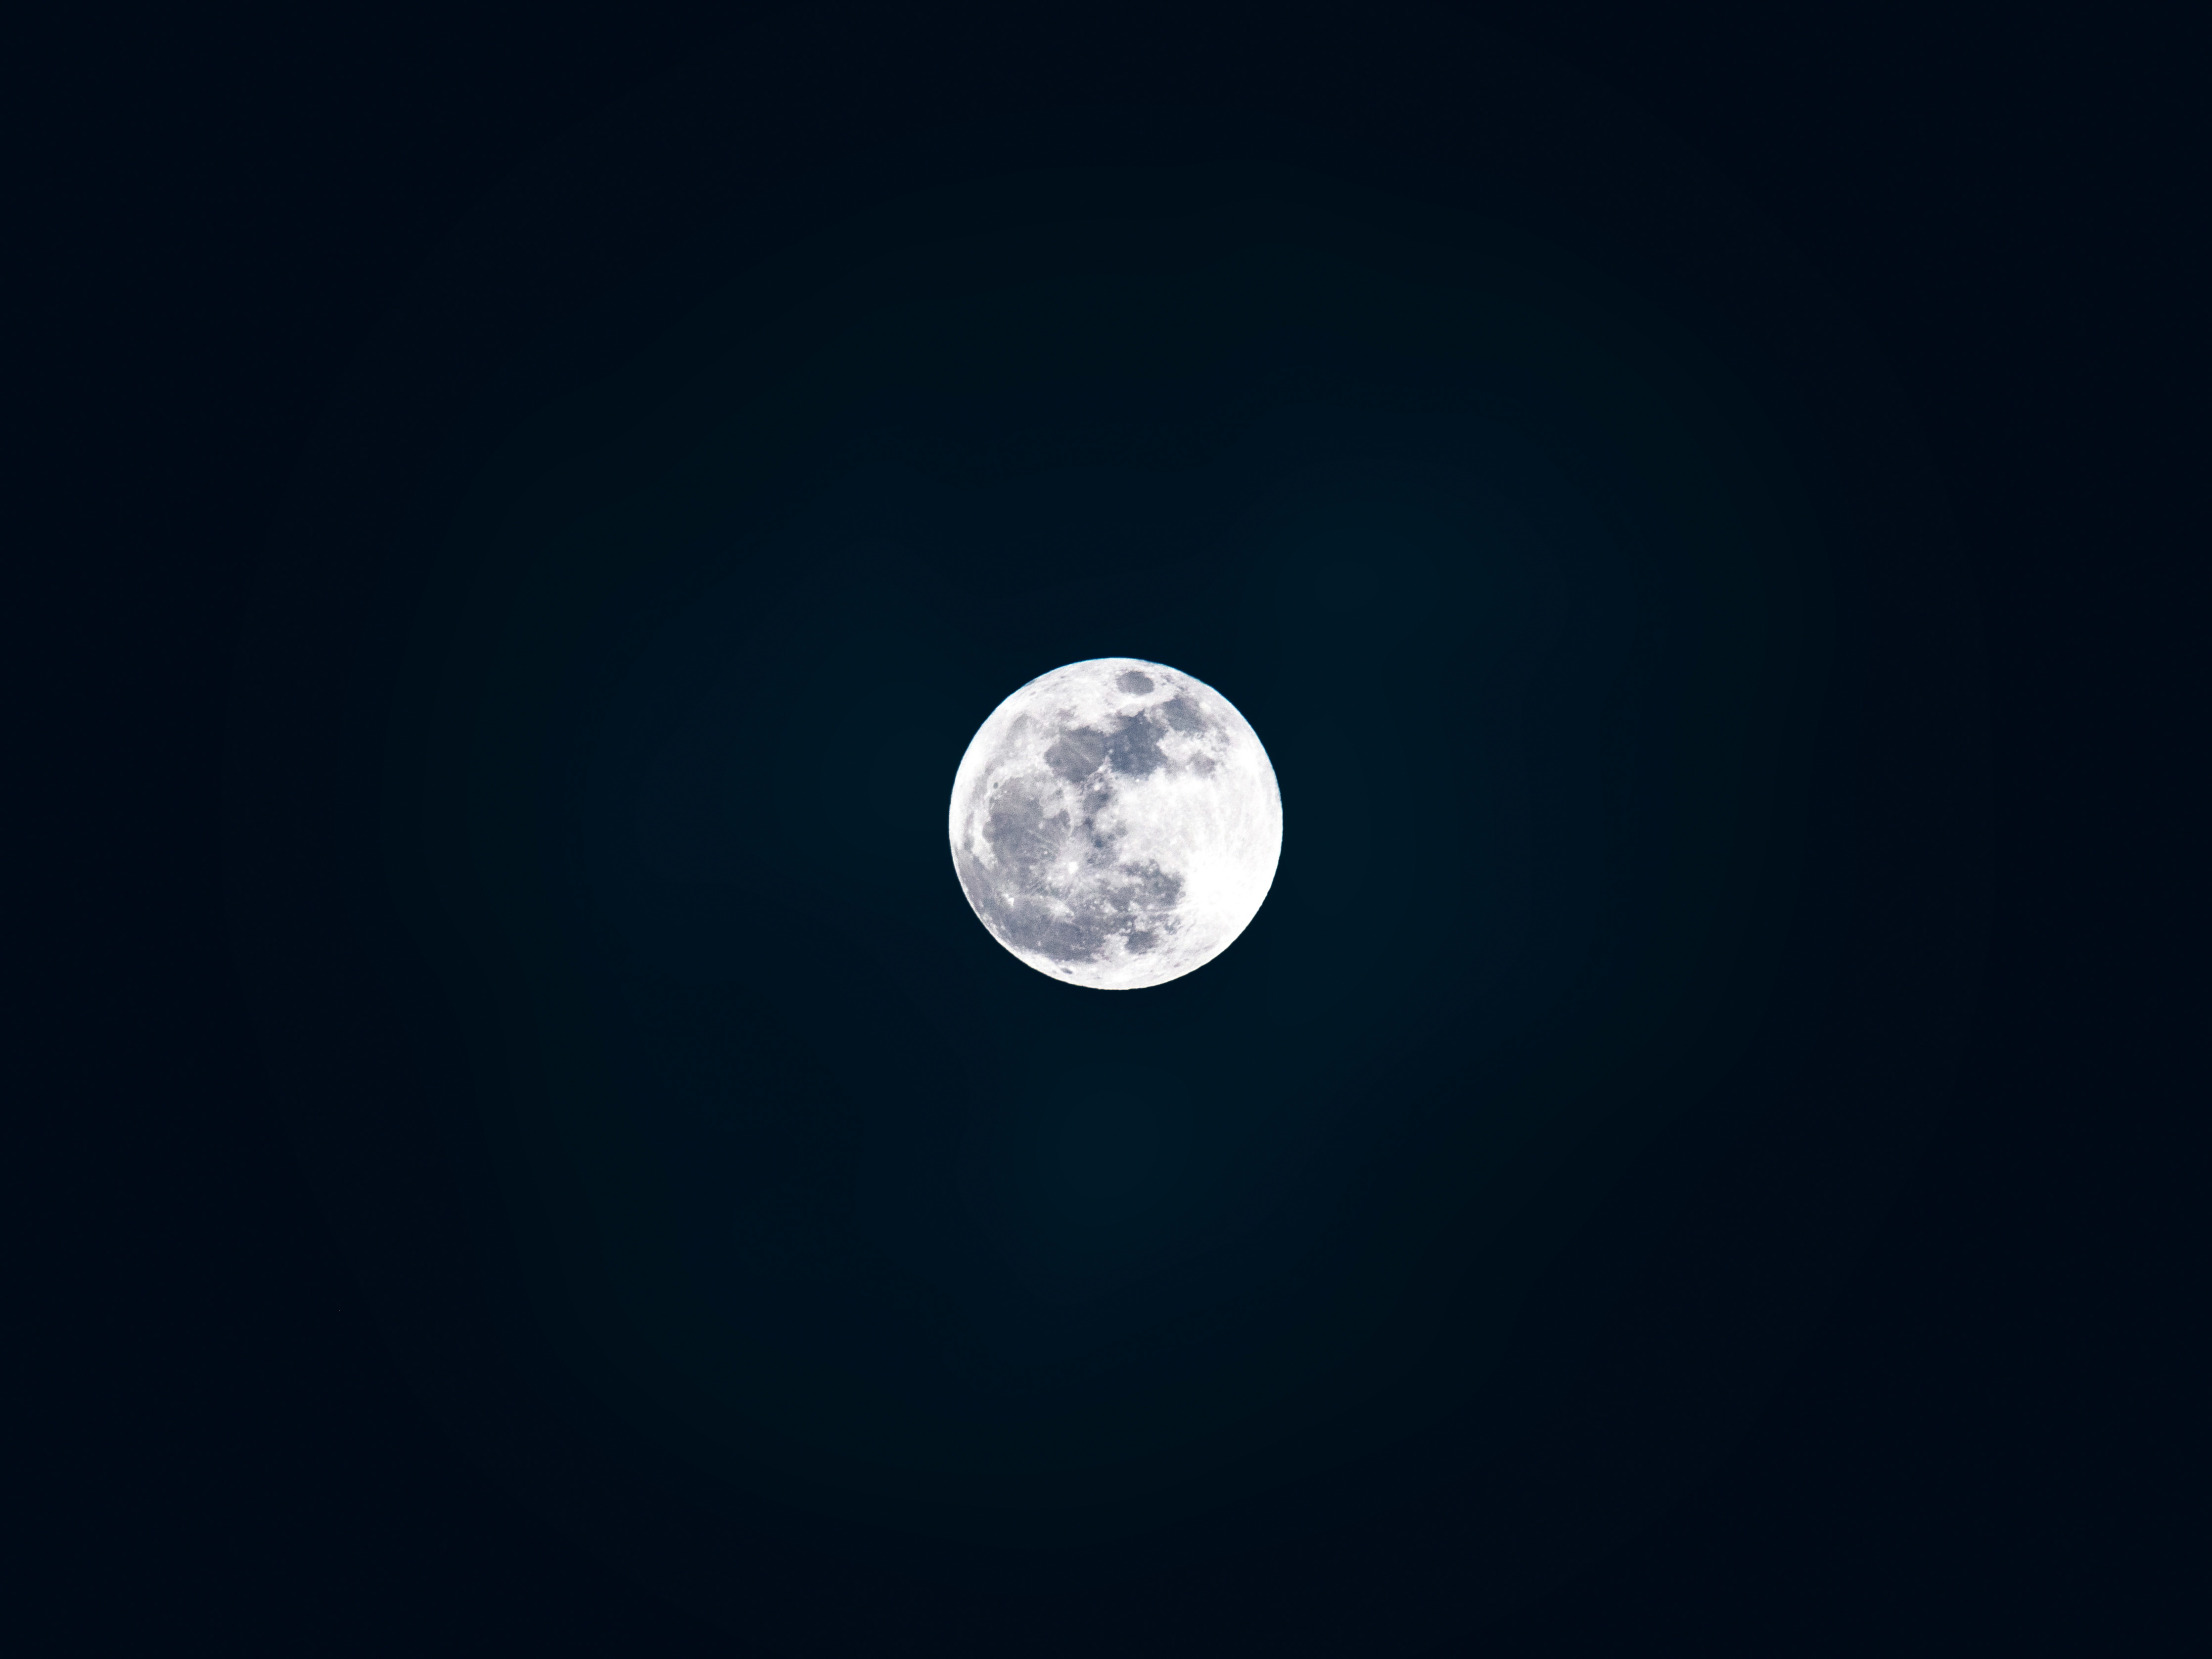 moon wallpaper download,moon,full moon,sky,astronomical object,celestial event